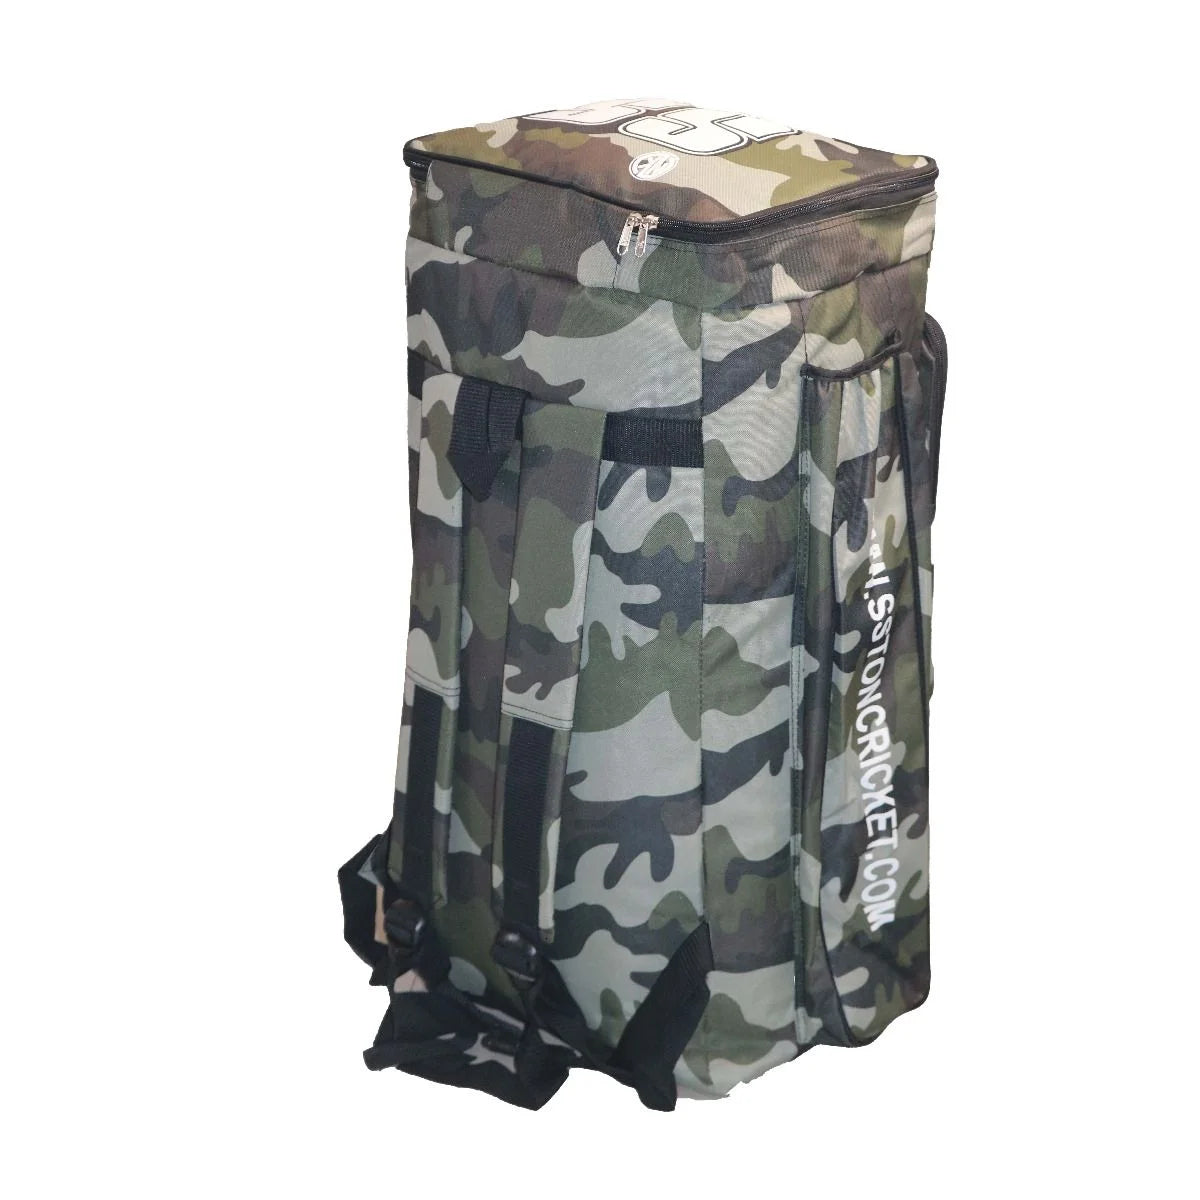 SS Camo cricket kit duffle bag in camo print, featuring full premium padding, one main compartment, two external bat sleeves, one large external front pocket, one shoe compartment, and extra waist belt for professional cricketers.